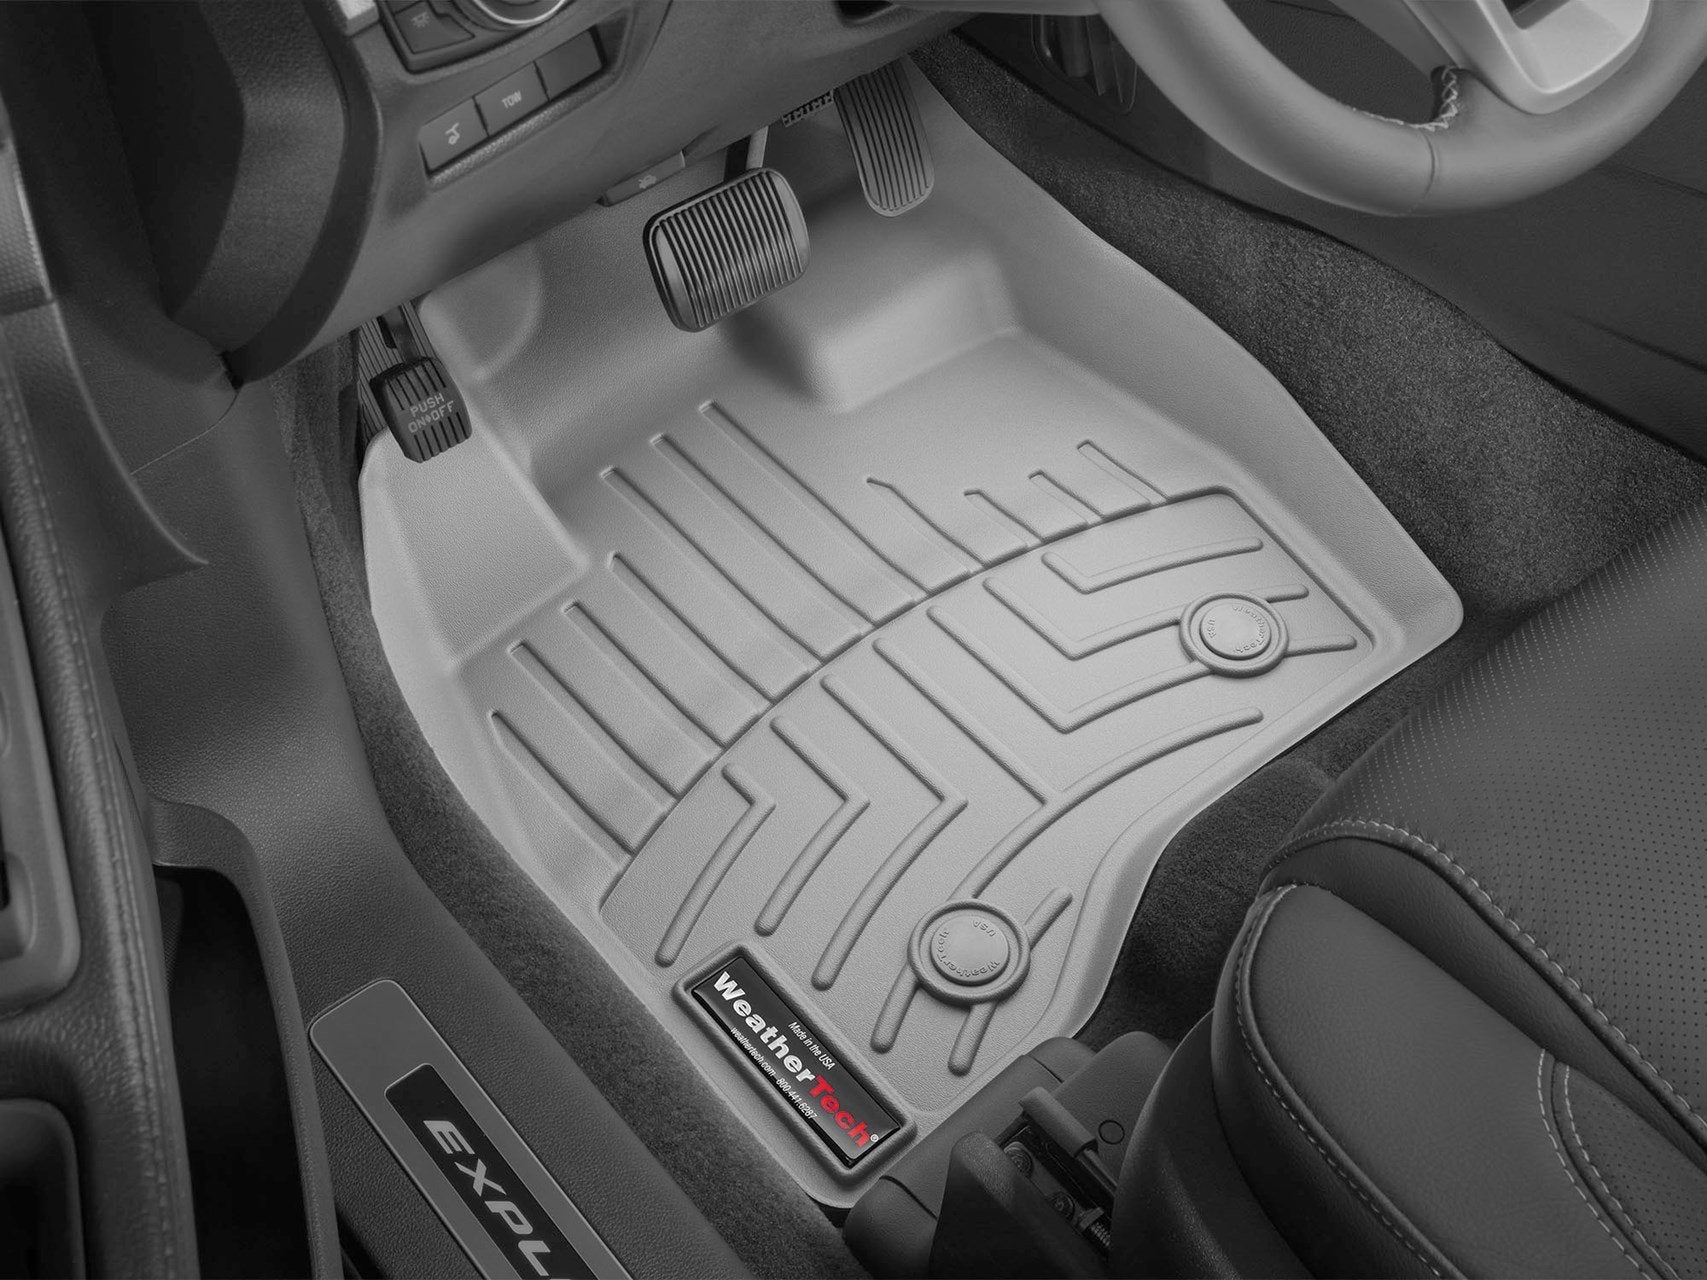 2015-2018 Ford F-150-Weathertech Floor Liners-Full Set 1st Row Bucket Seating (Includes 1st and 2nd Row)-Fits Supercrew Models Only-Black